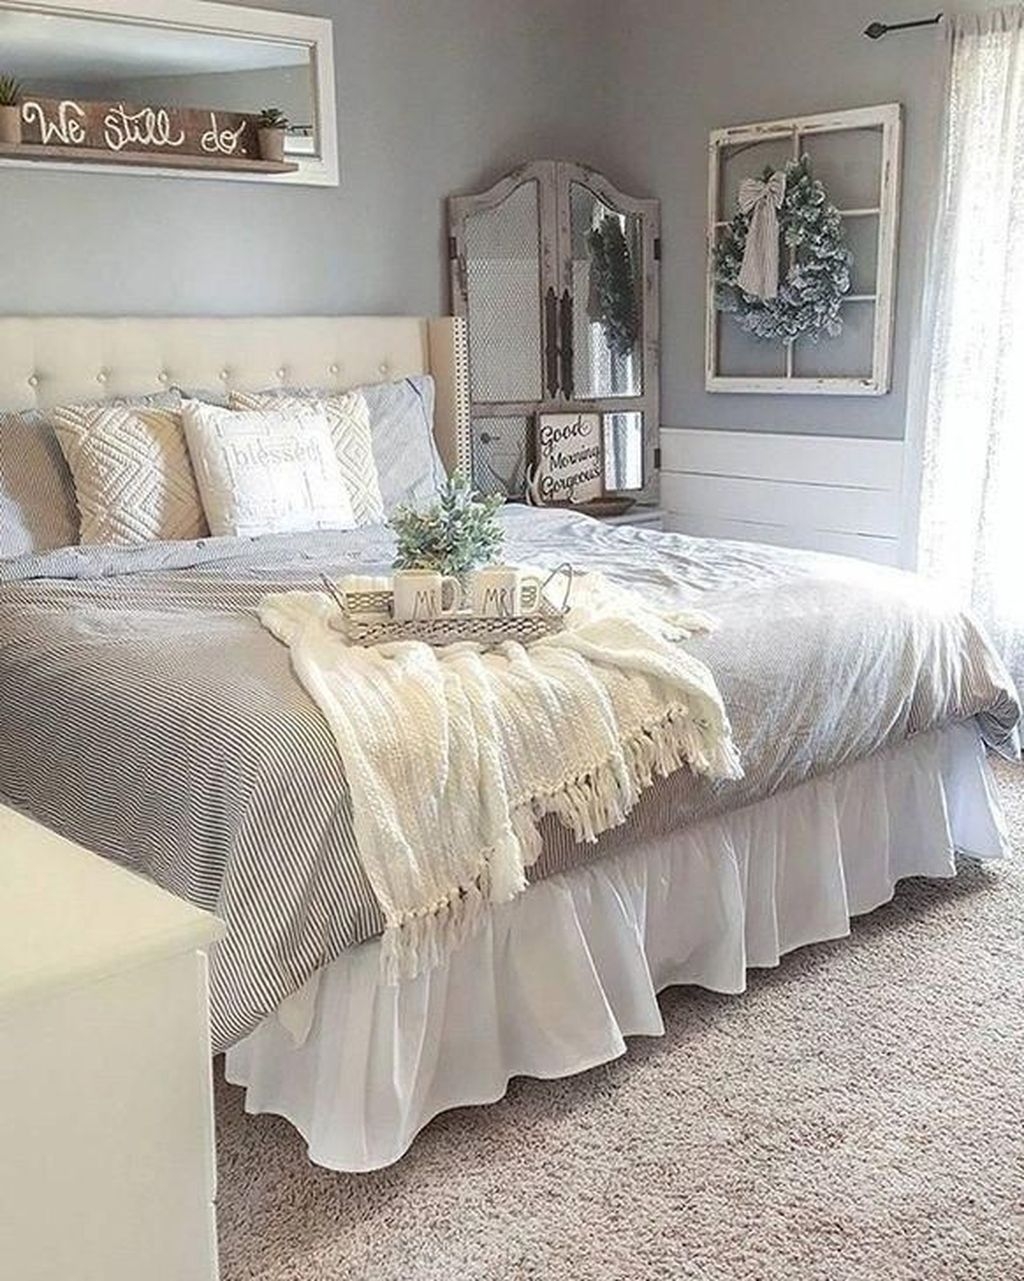 Gorgeous Farmhouse Bedroom Remodel Ideas On A Budget 36